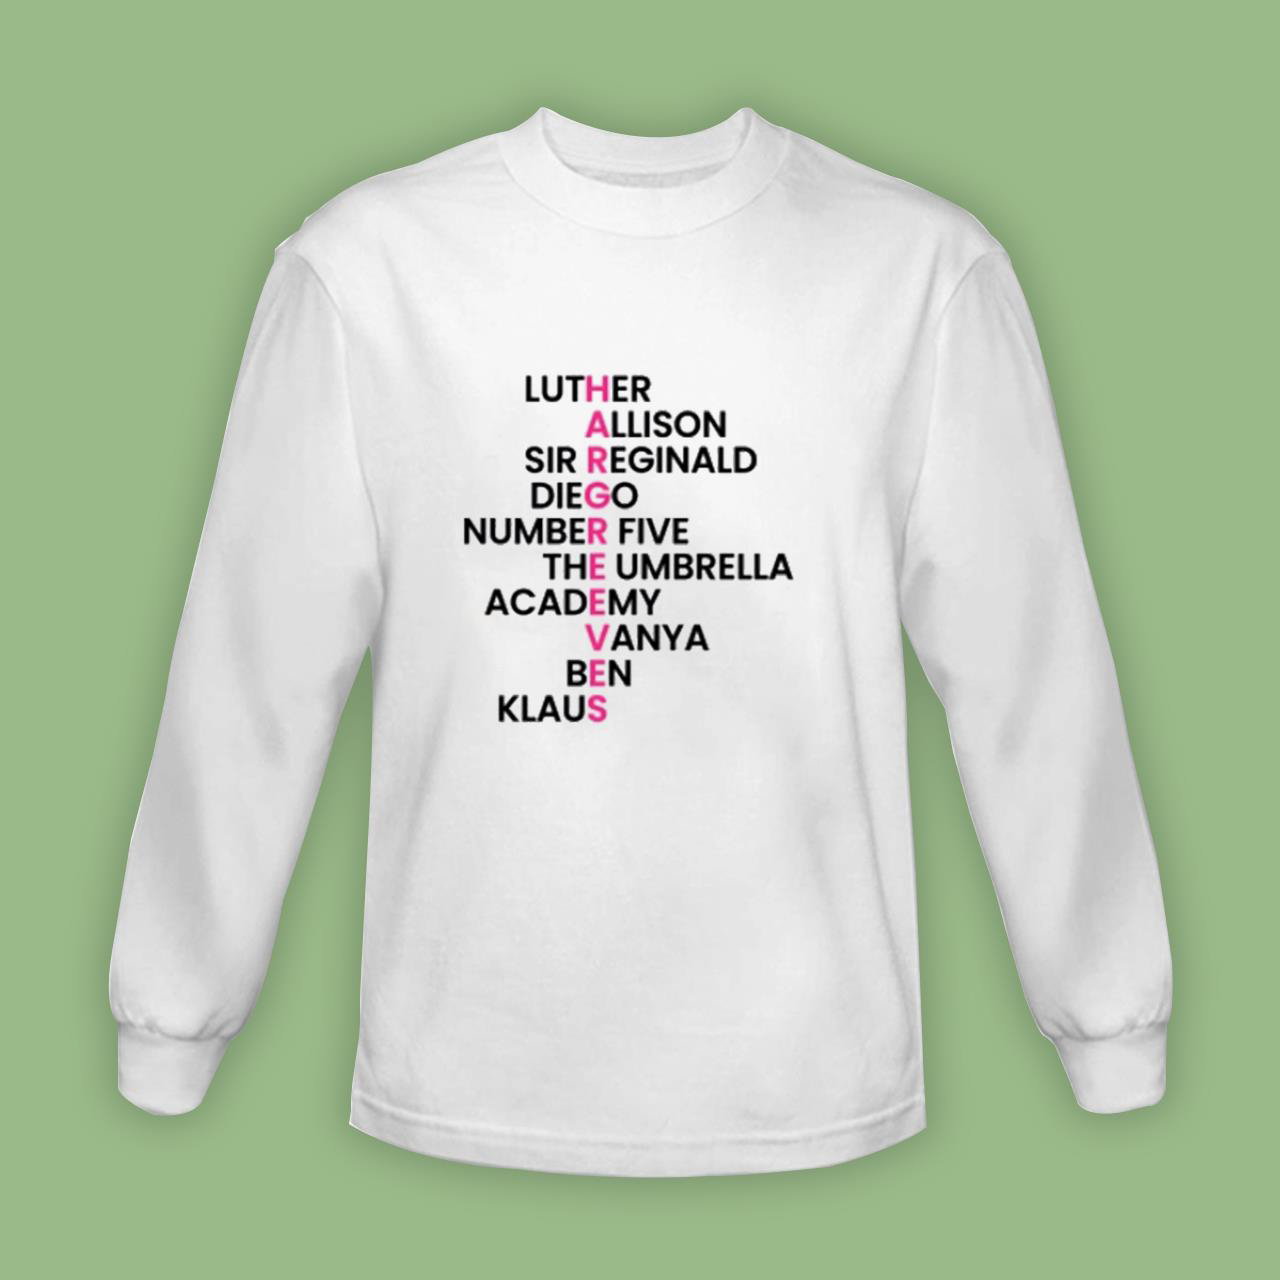 Hargreeves Family - The Umbrella Academy T-Shirt